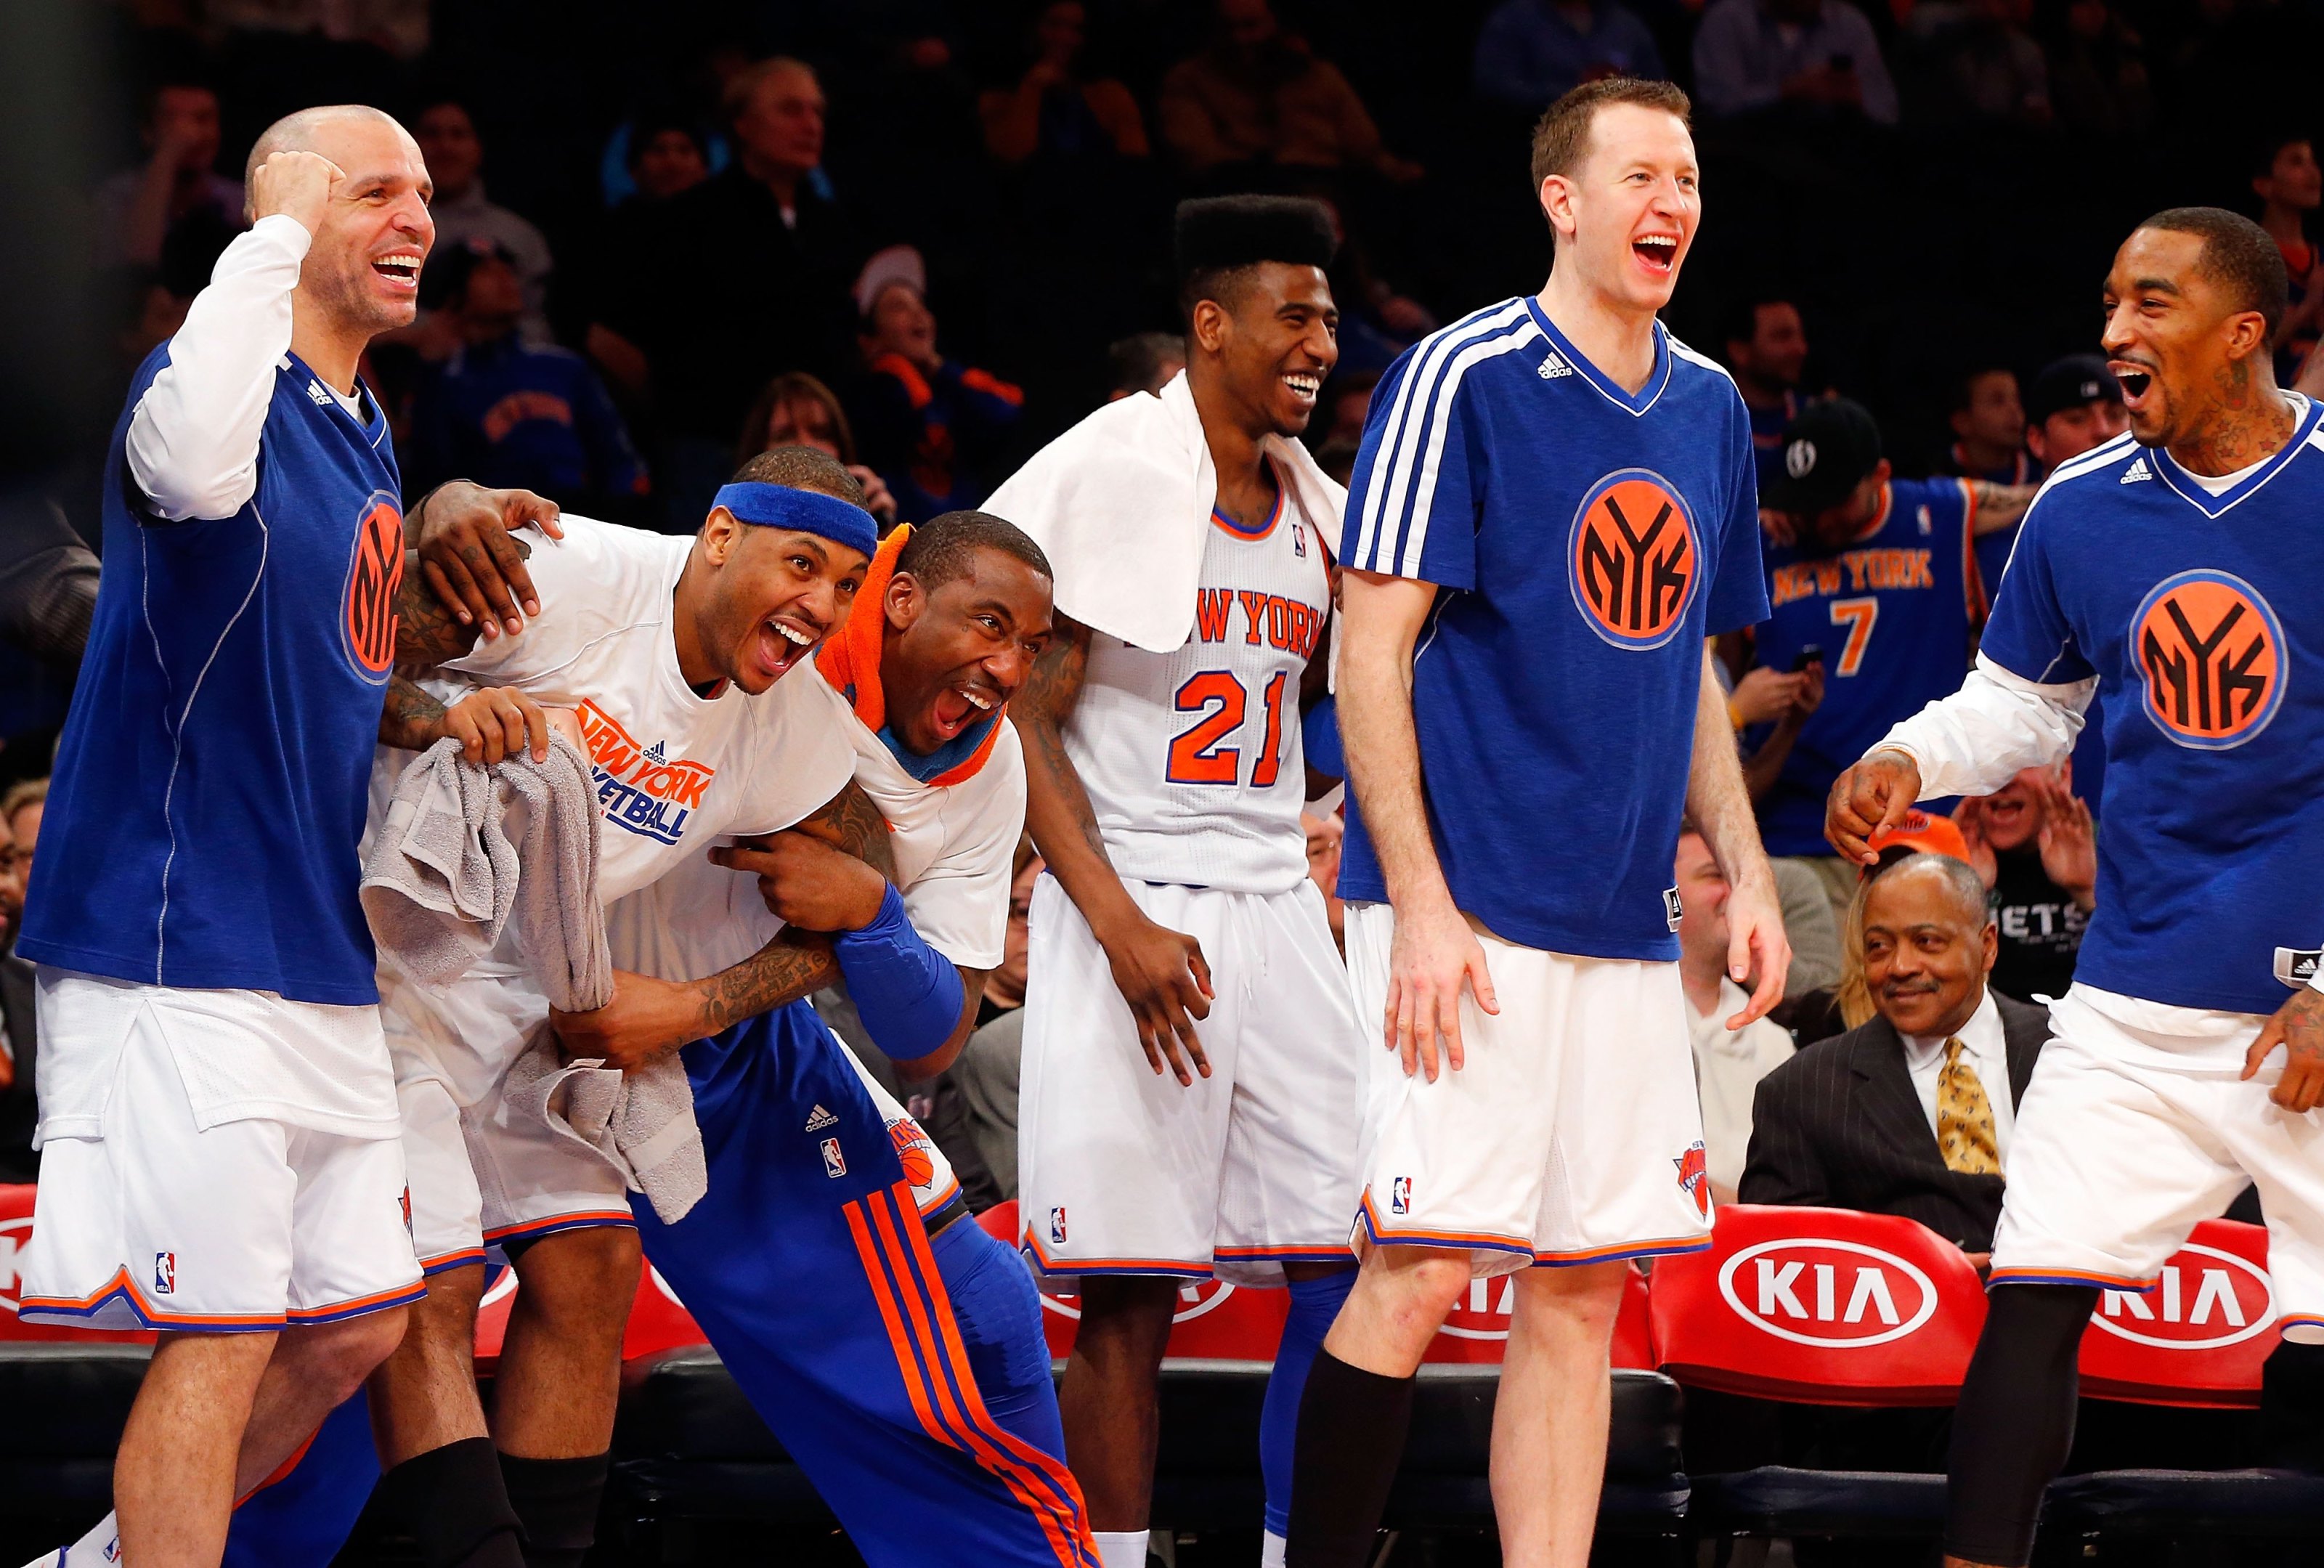 Kidd and Camby Introduced as the Newest Knicks - The New York Times